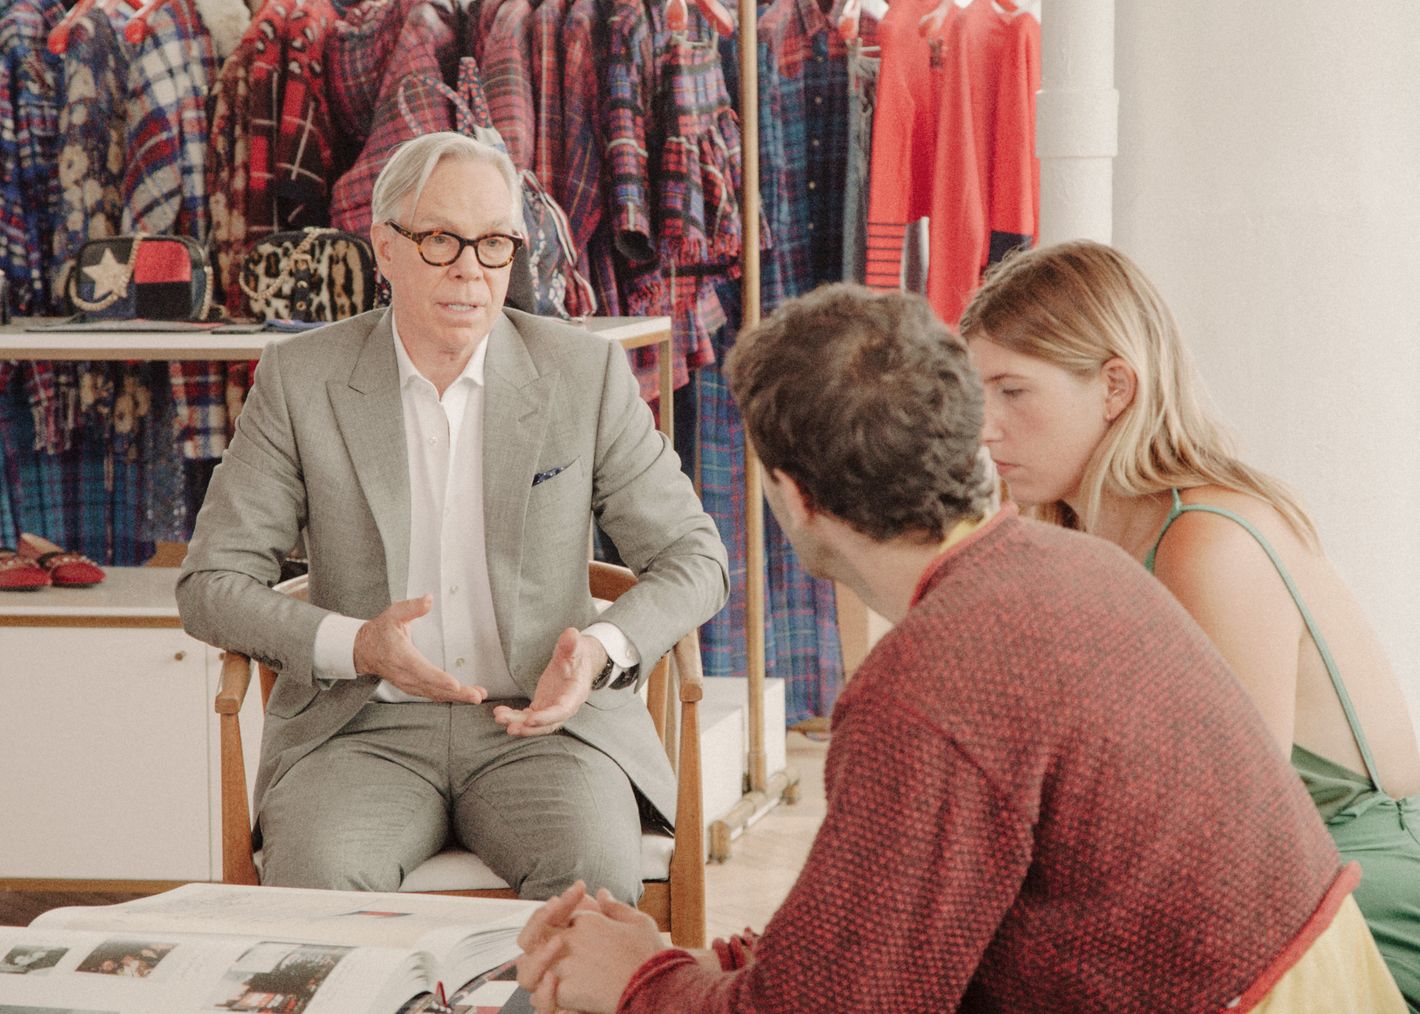 Umulig Perfervid officiel What Do Tommy Hilfiger and Eckhaus Latta Have in Common?